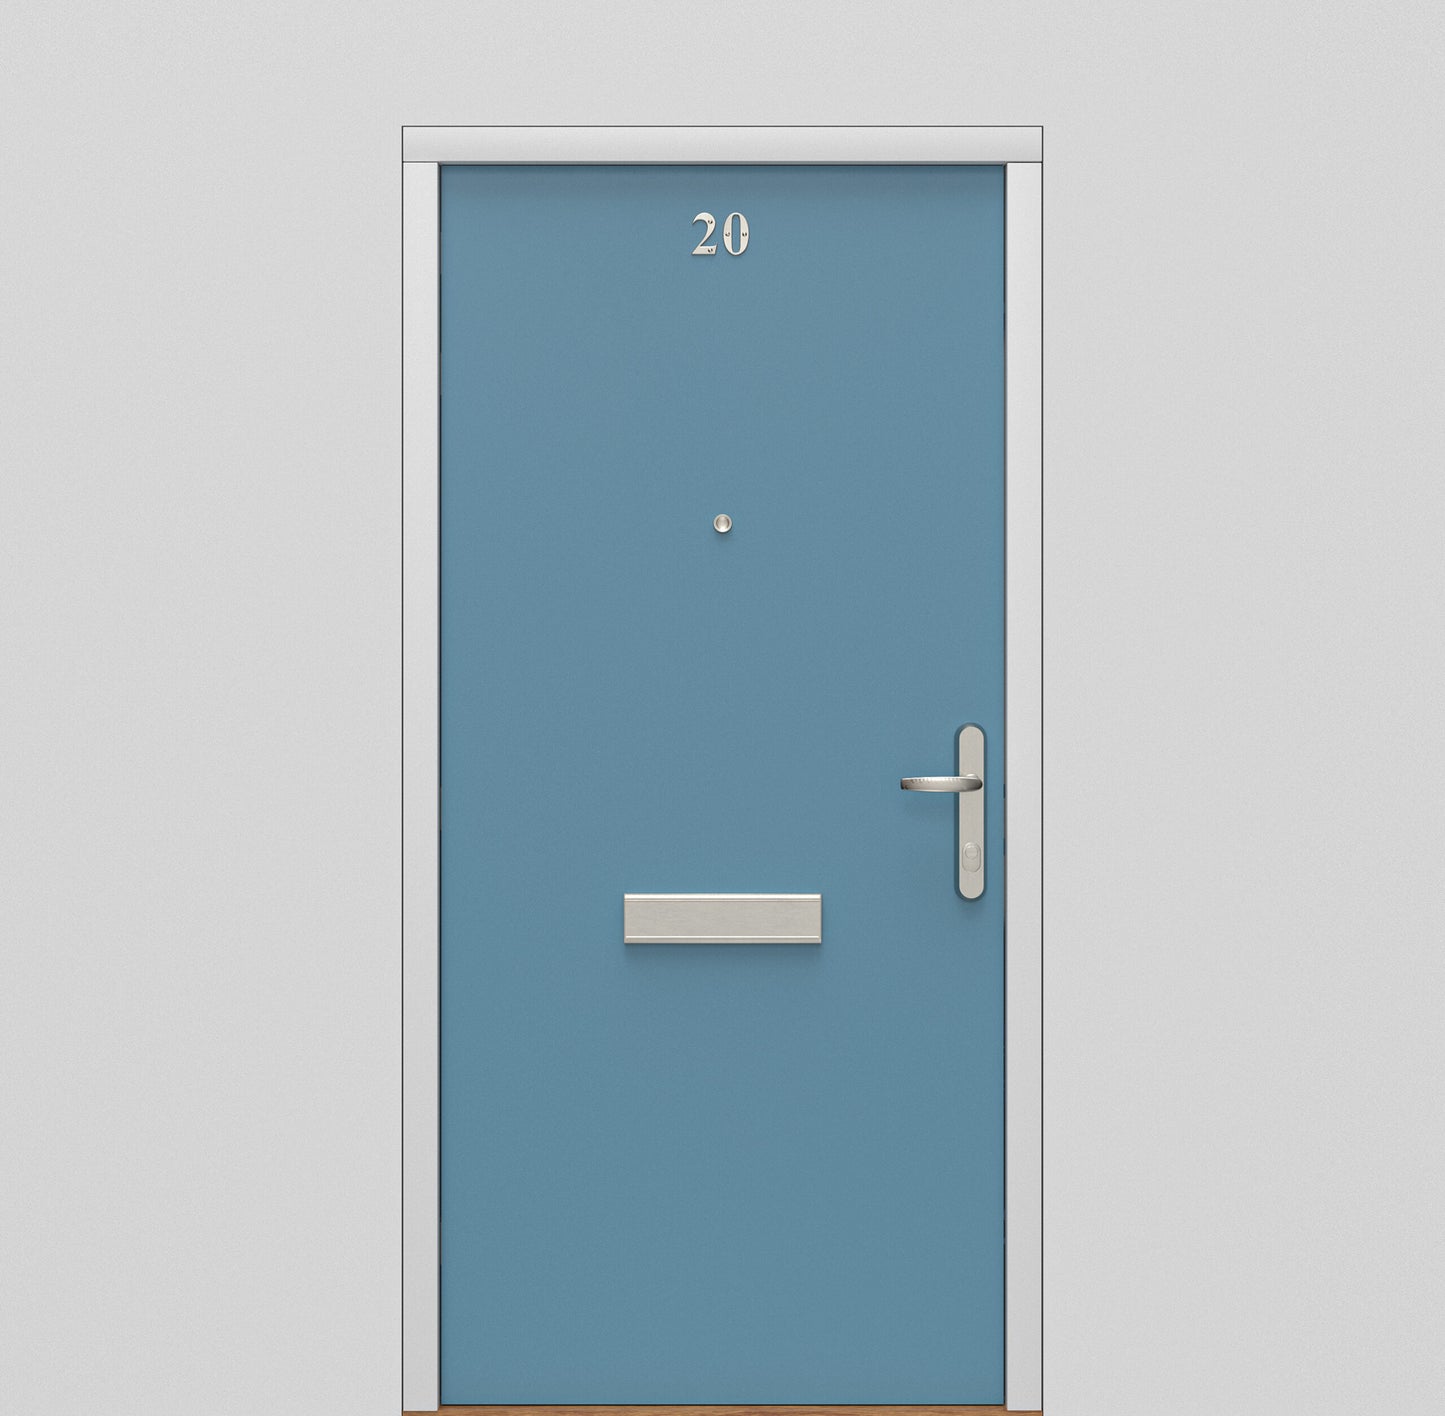 FD30s Fire Door Set Flush Bespoke Painted Flat Apartment Fire Door And Frame With Escape lock